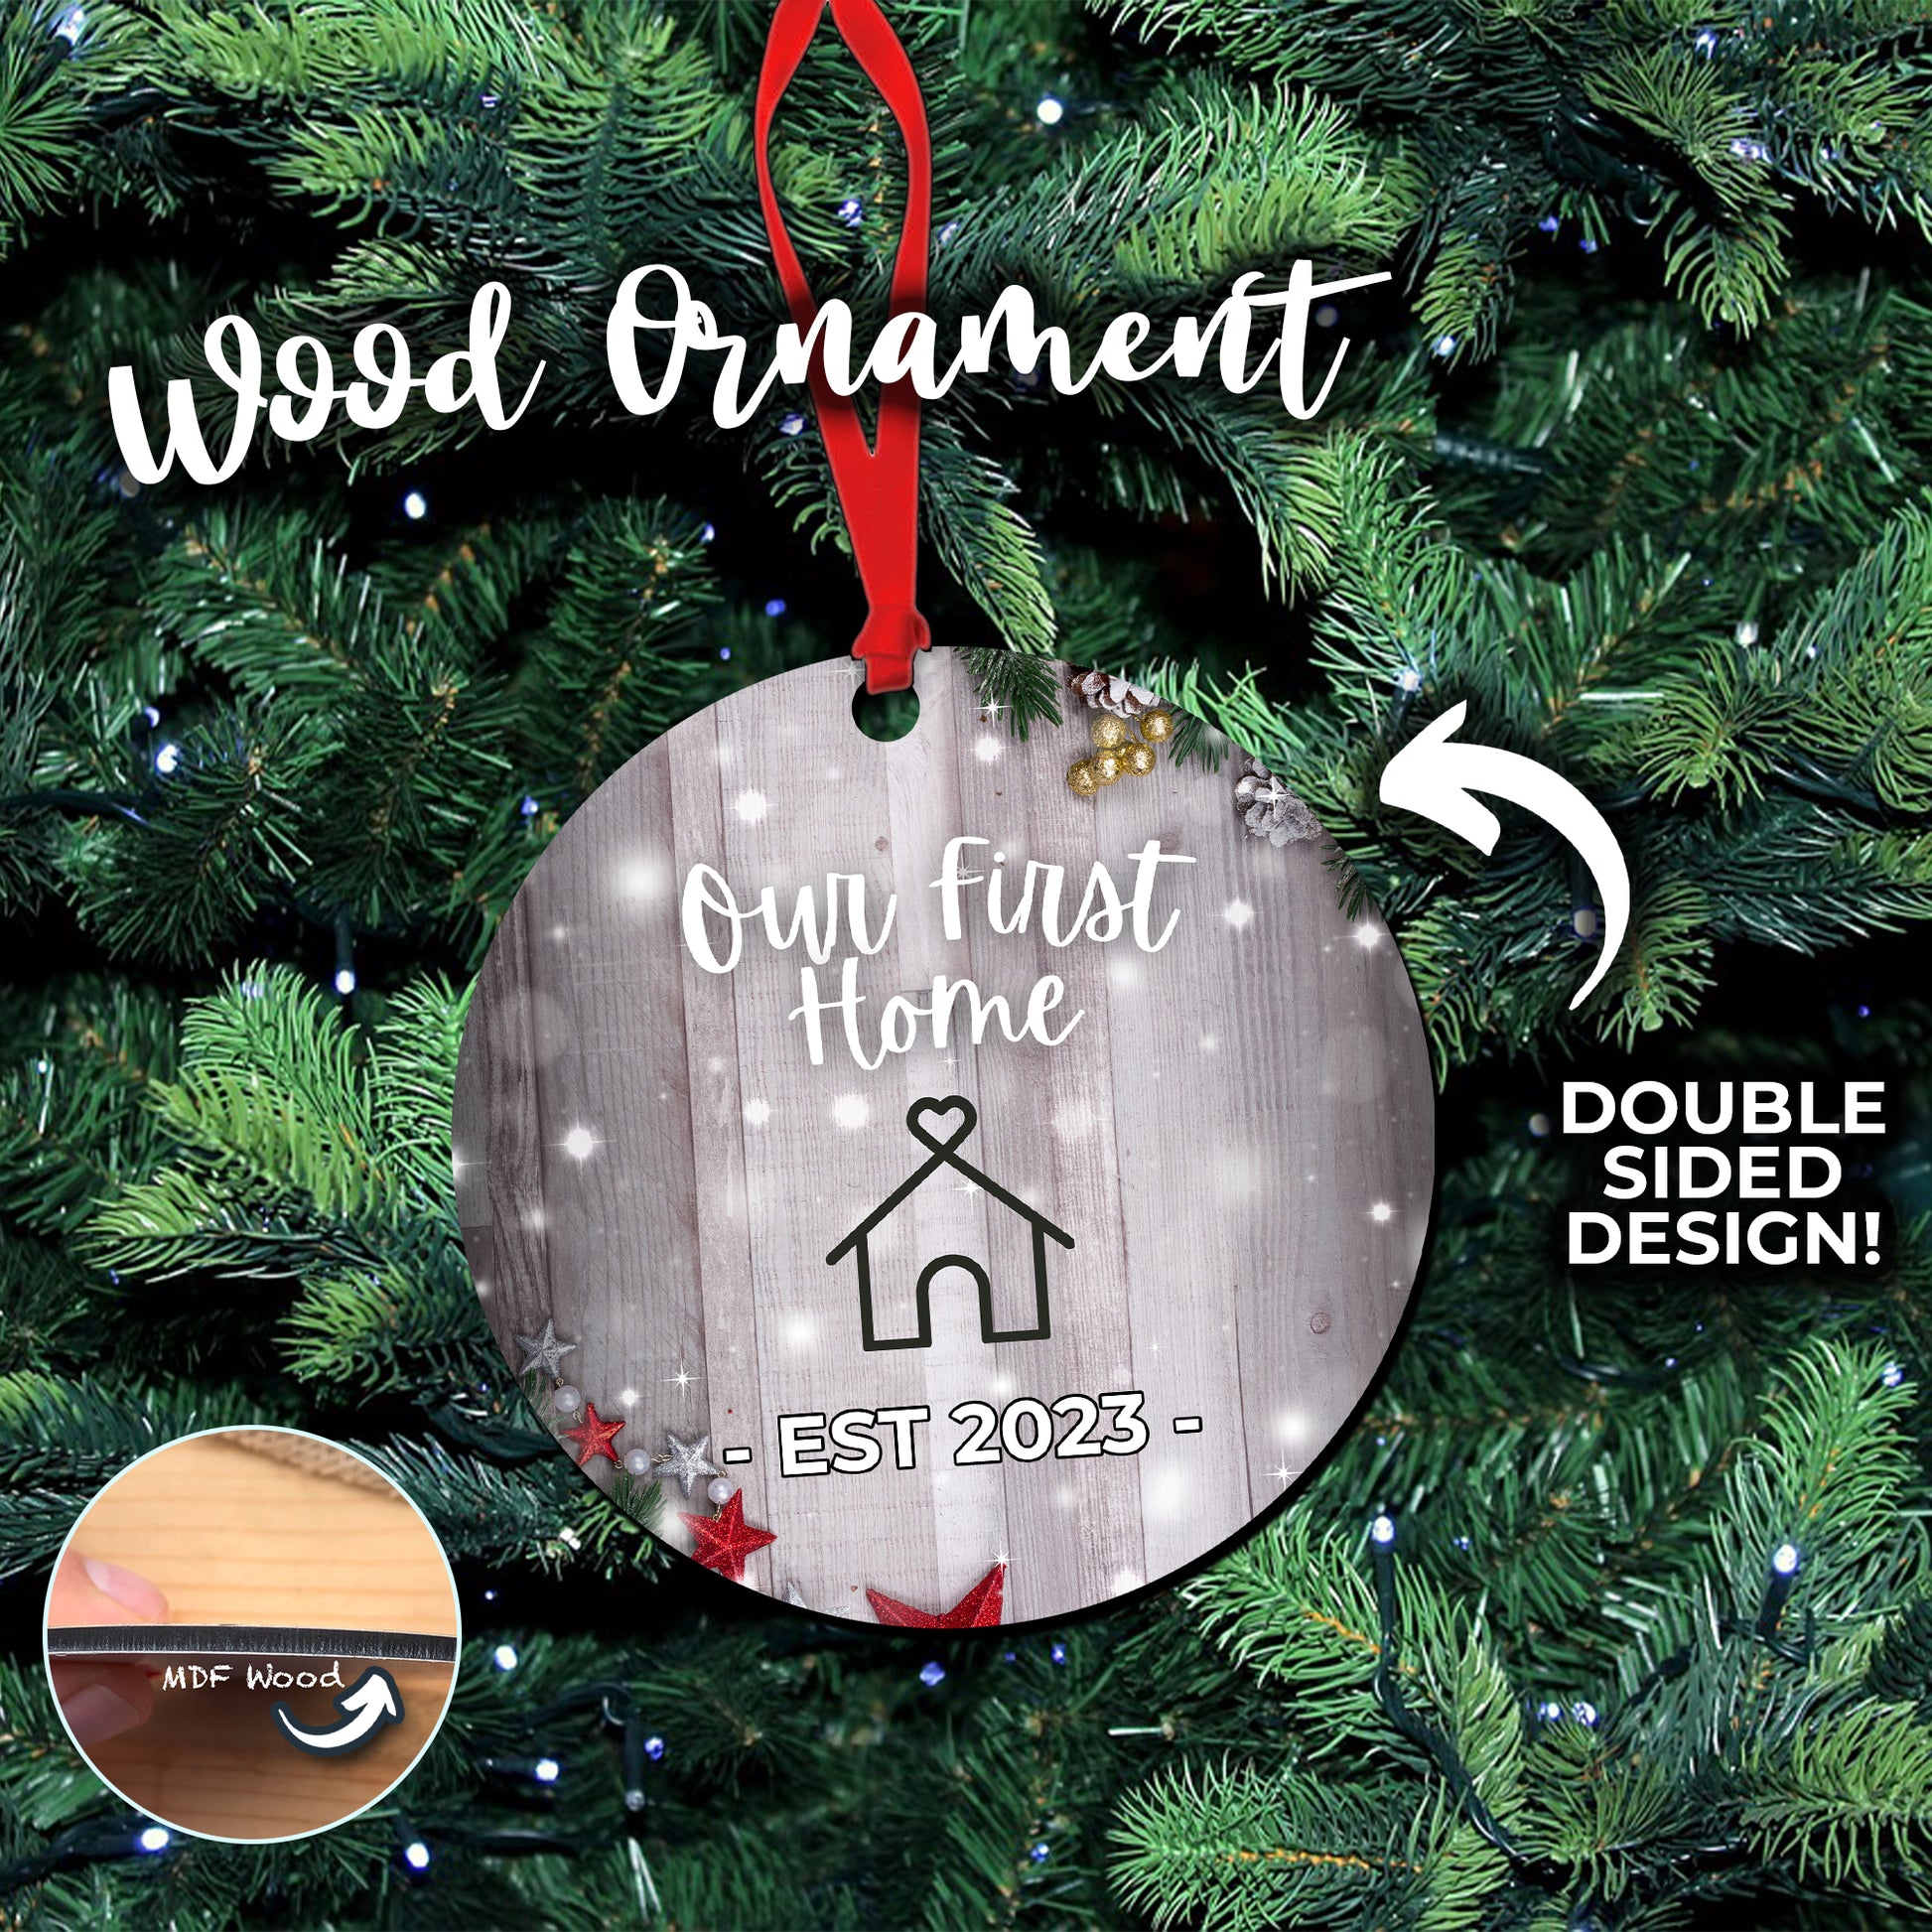 Our First Home - Established 2023 - Double Sided Wooden Ornament